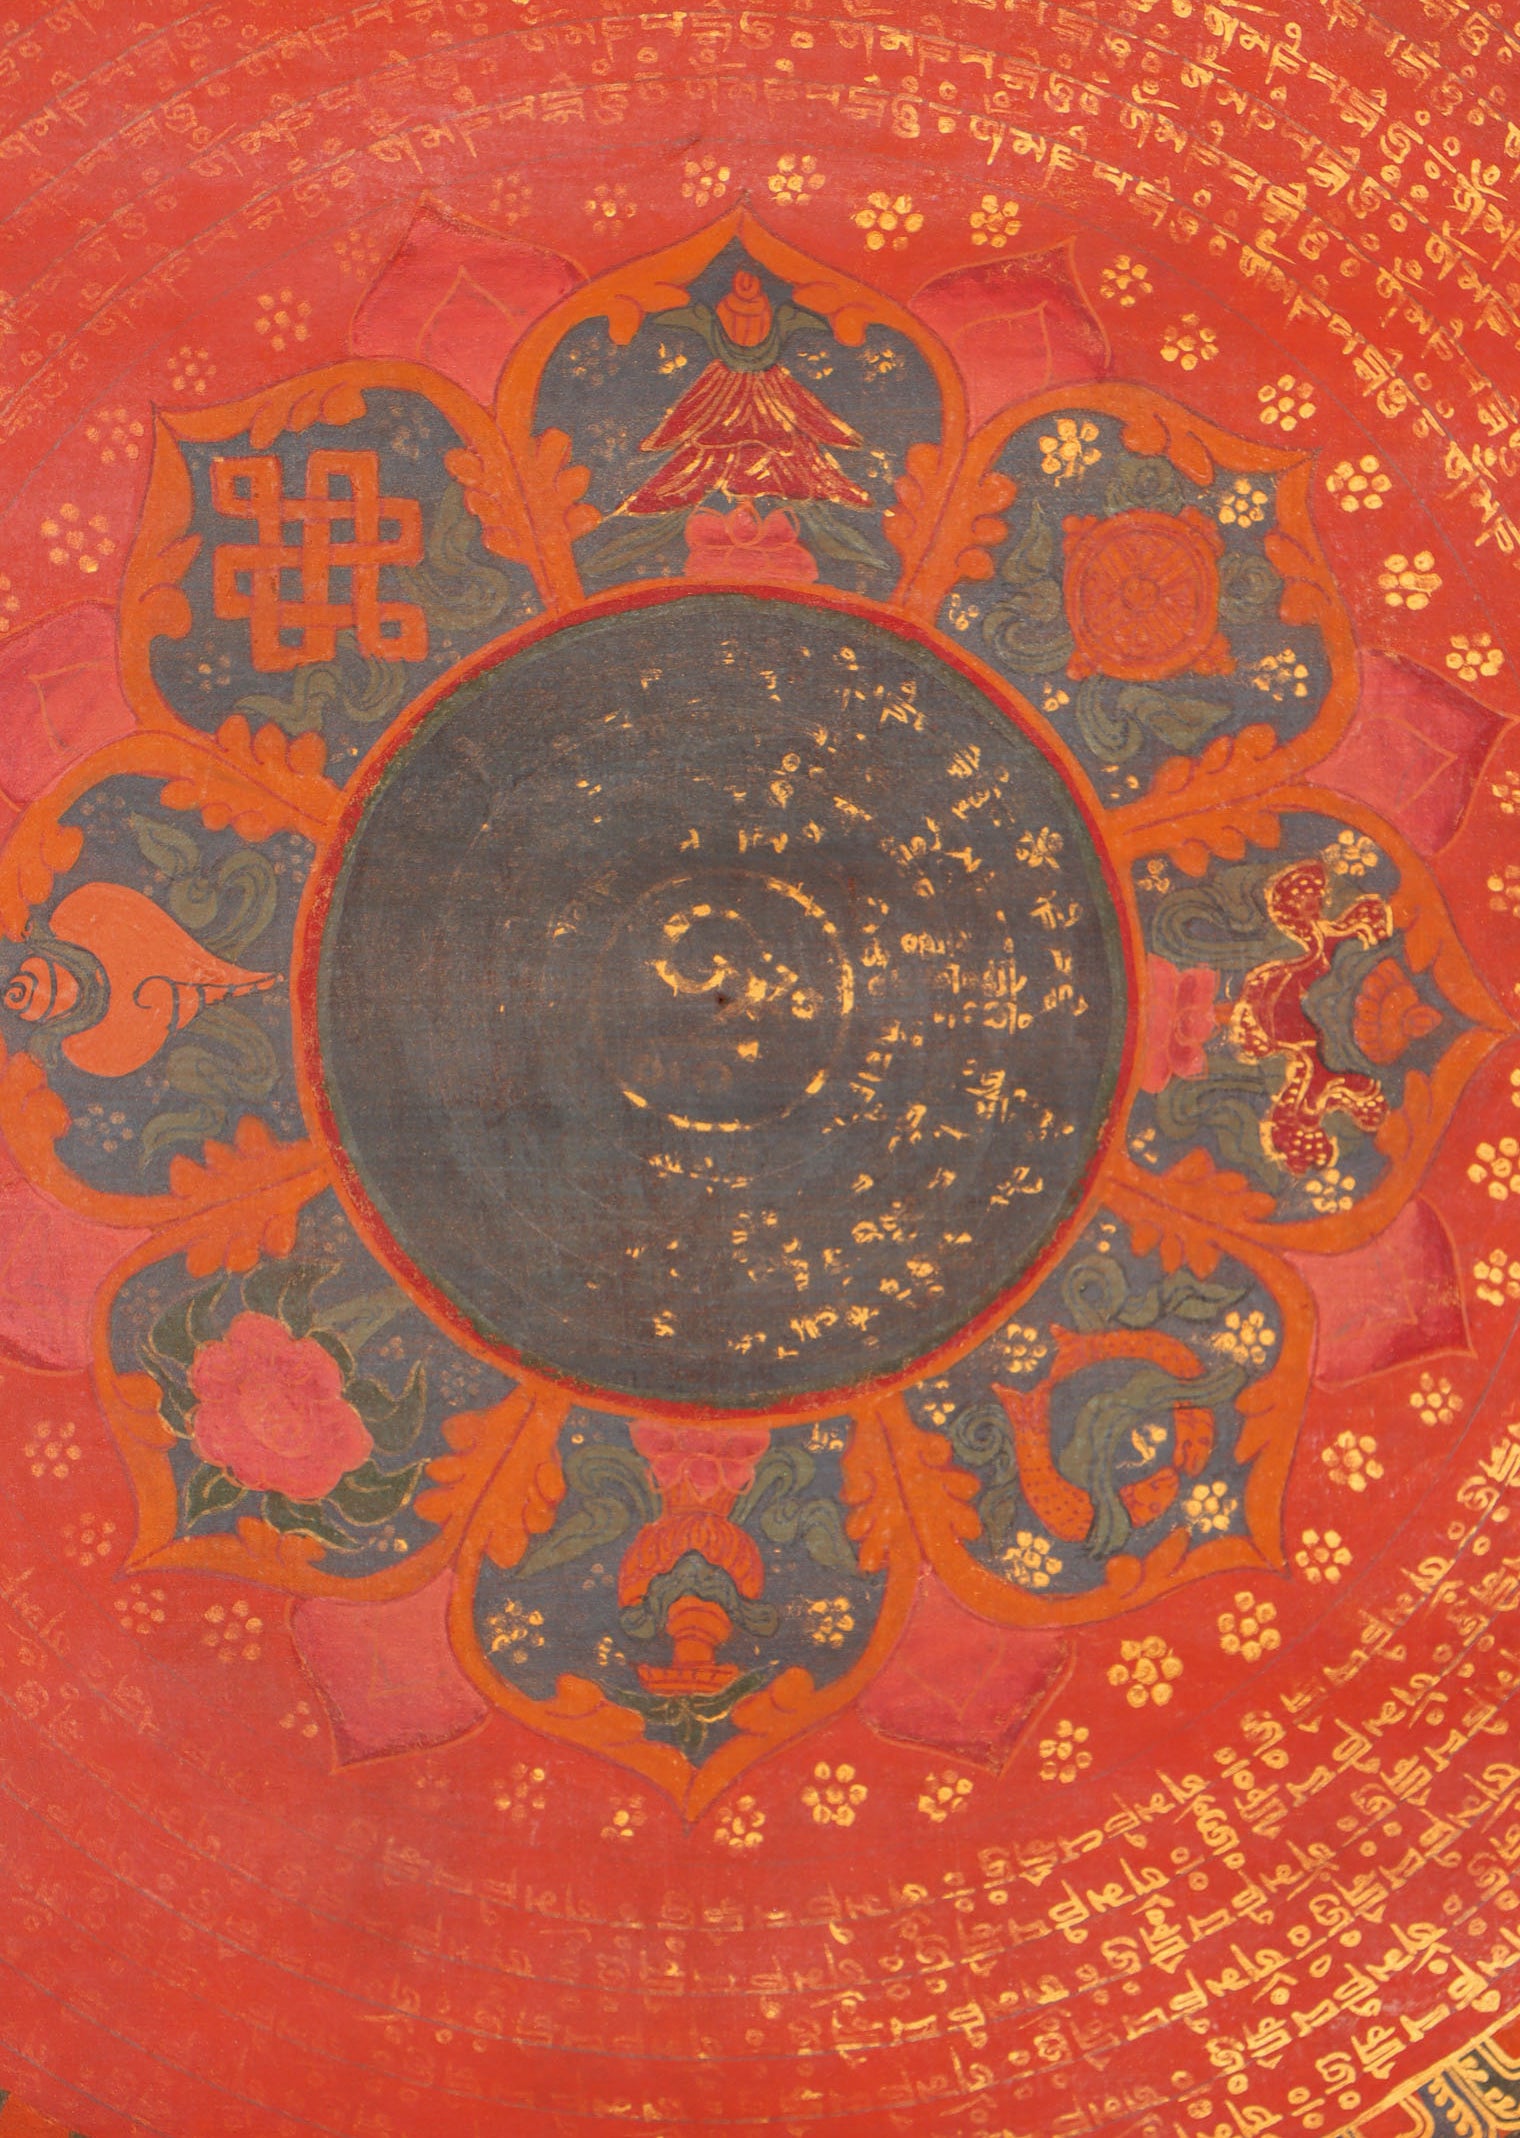 Antique Mantra Mandala Thangka Painting for religious rites and rituals.